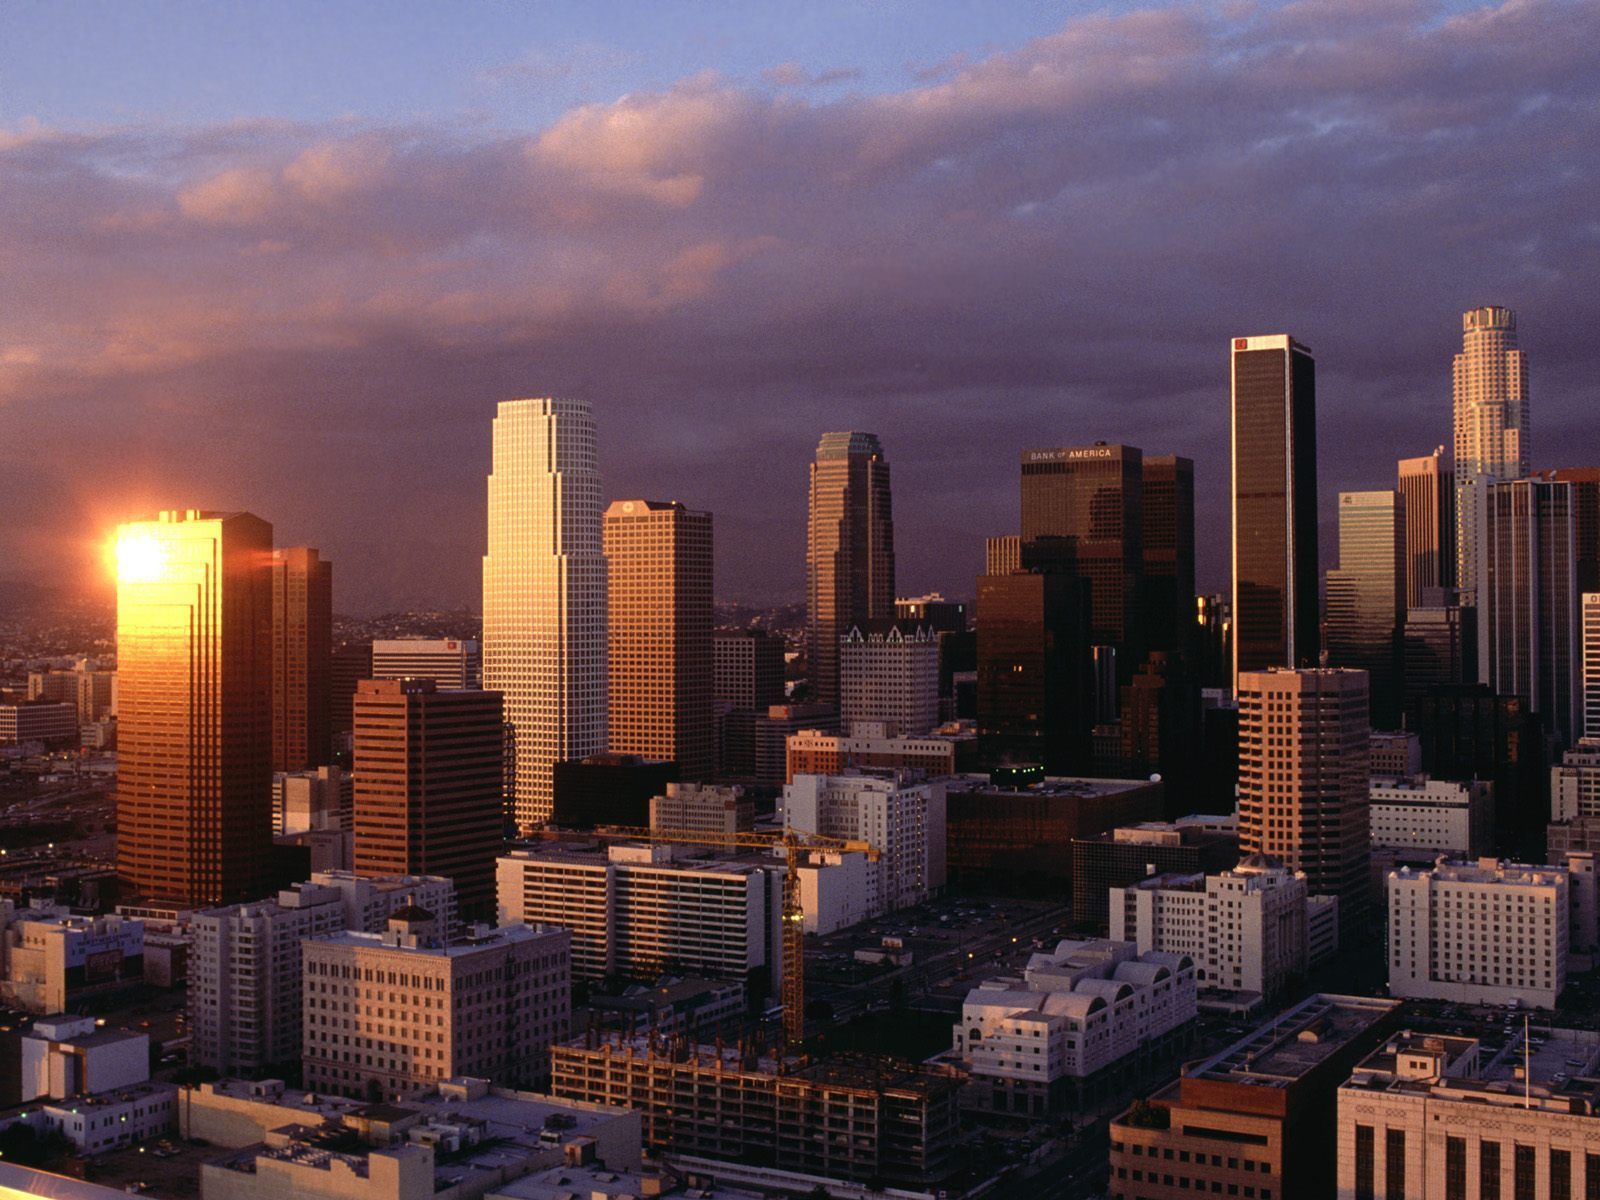 Los angeles hd wallpaper free usa images